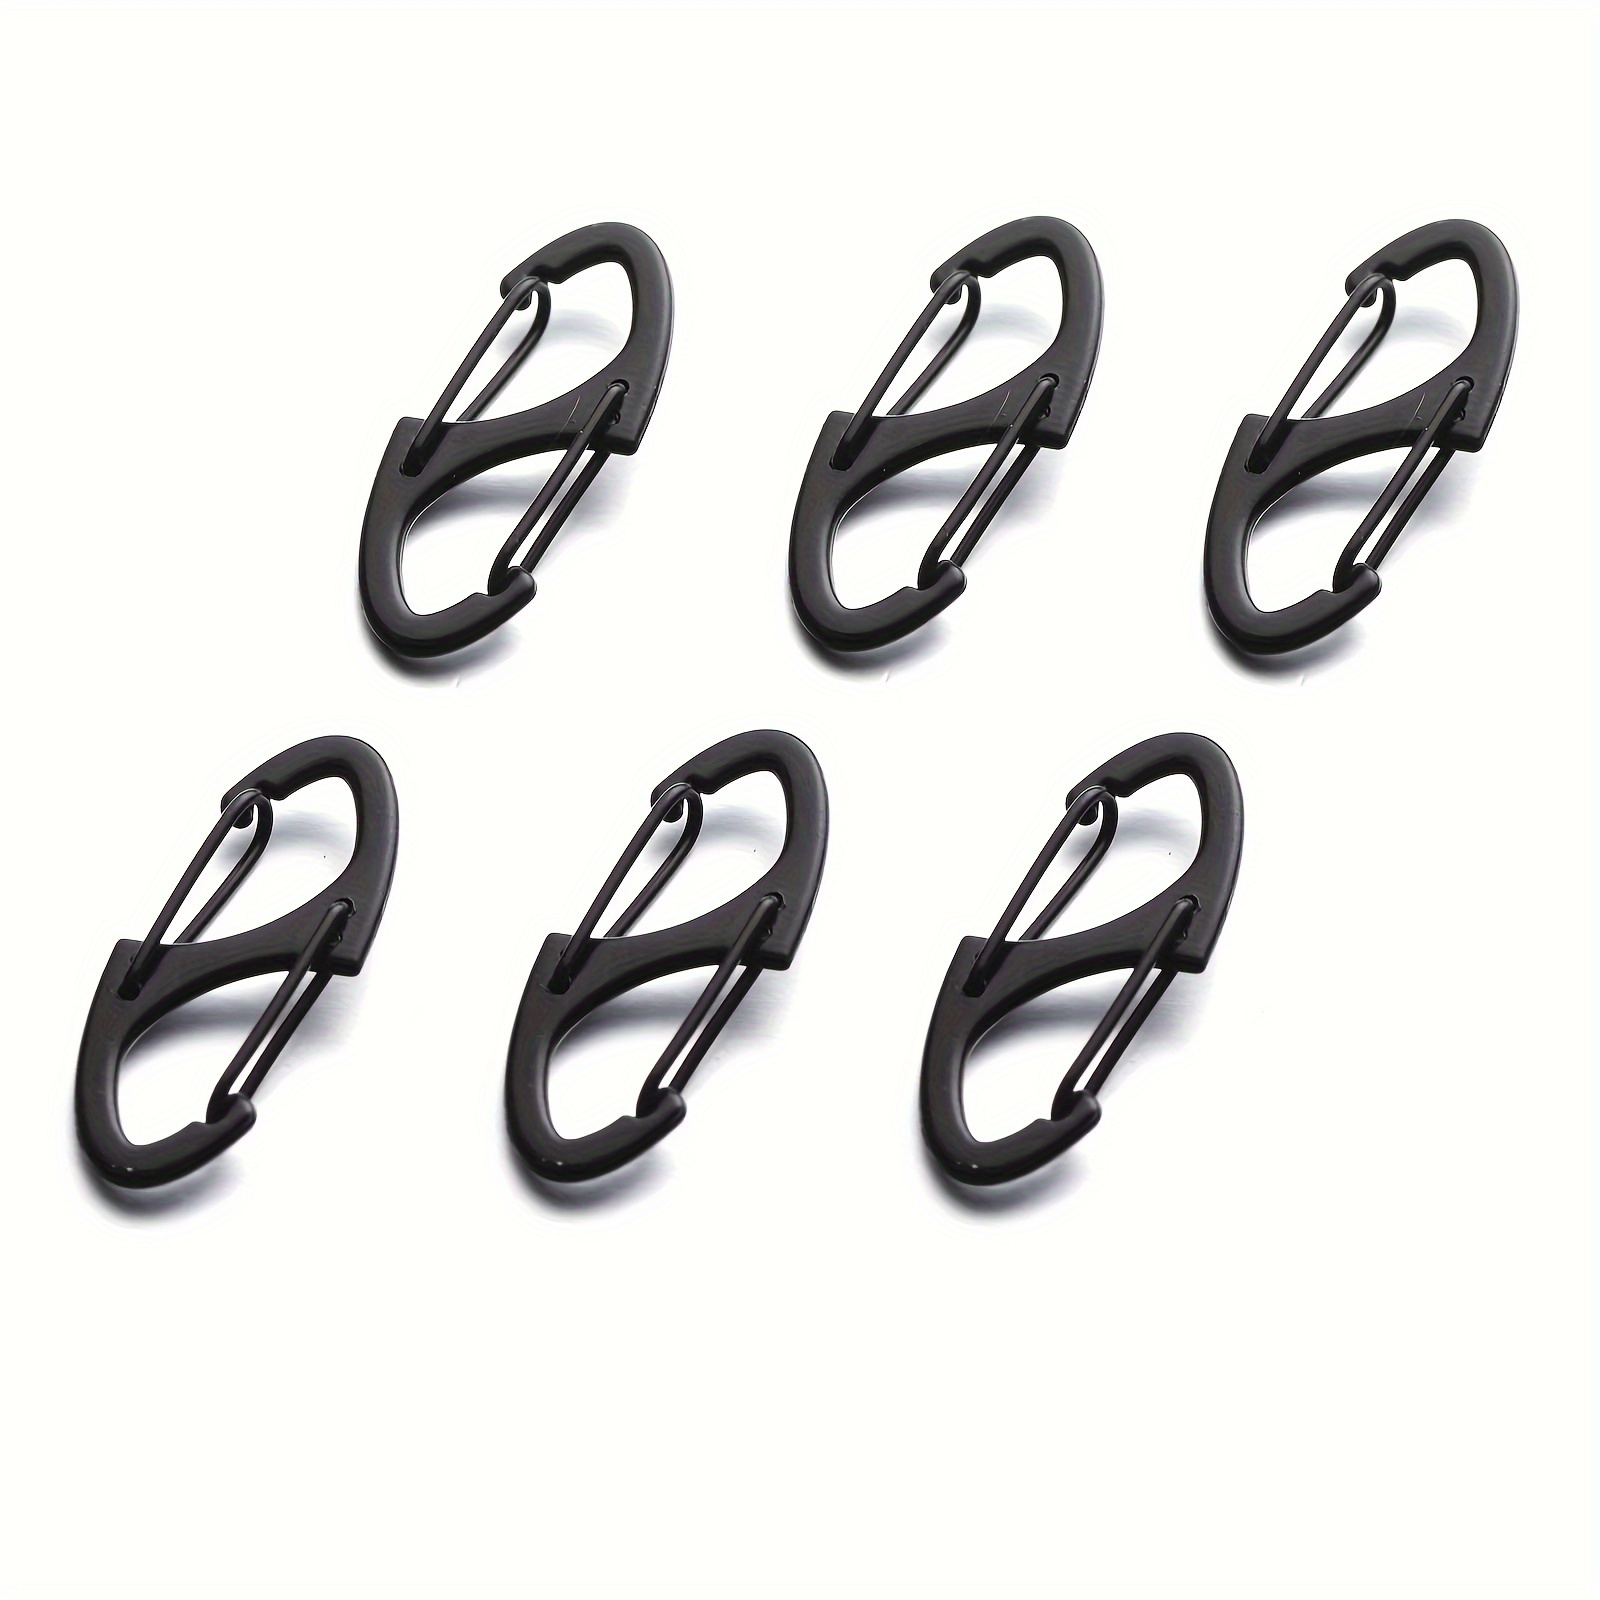  Zipper Clips Anti Theft, 20 Pcs Zipper Pull Locks for  Backpacks, Dual Spring S Carabiner Zipper Clip Theft Deterrent for Luggage  Suitcase Camping(Gun Black)